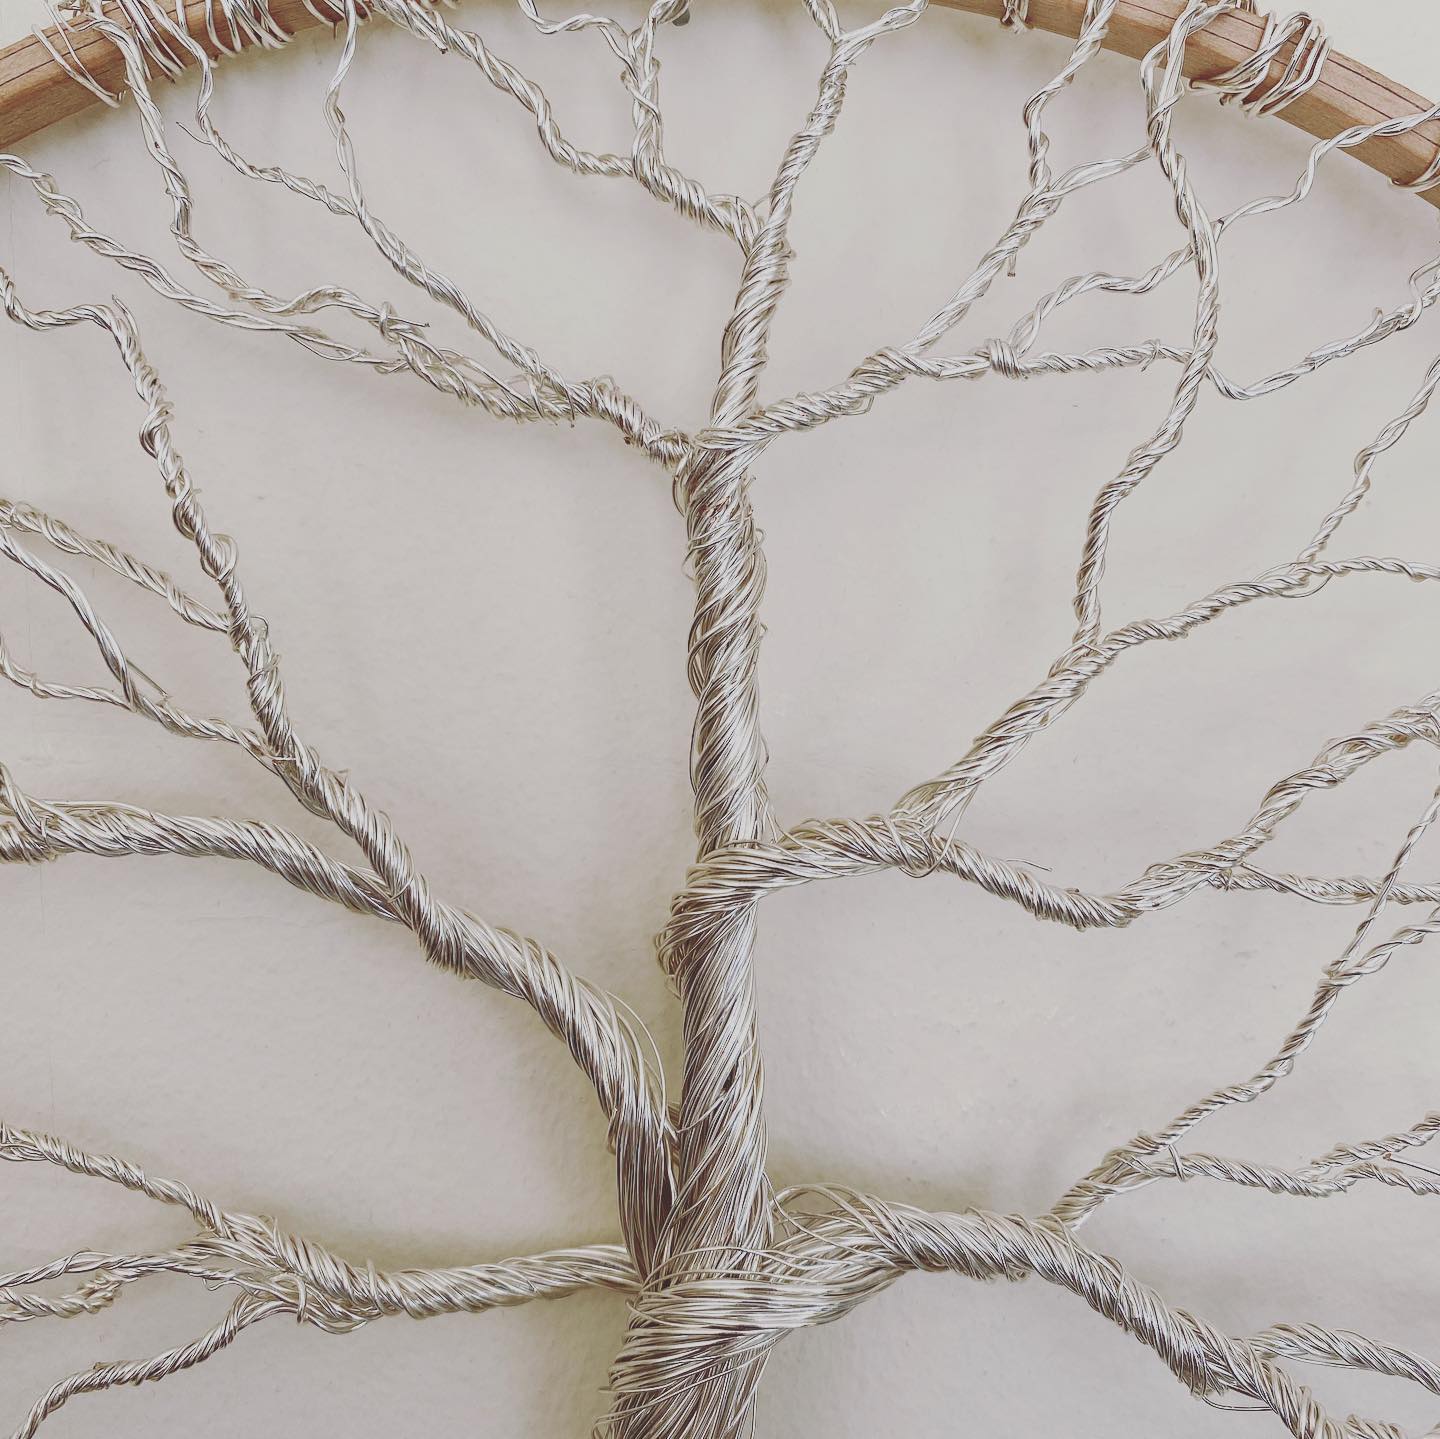 Winter tree of life sculpture made with silver wire close up